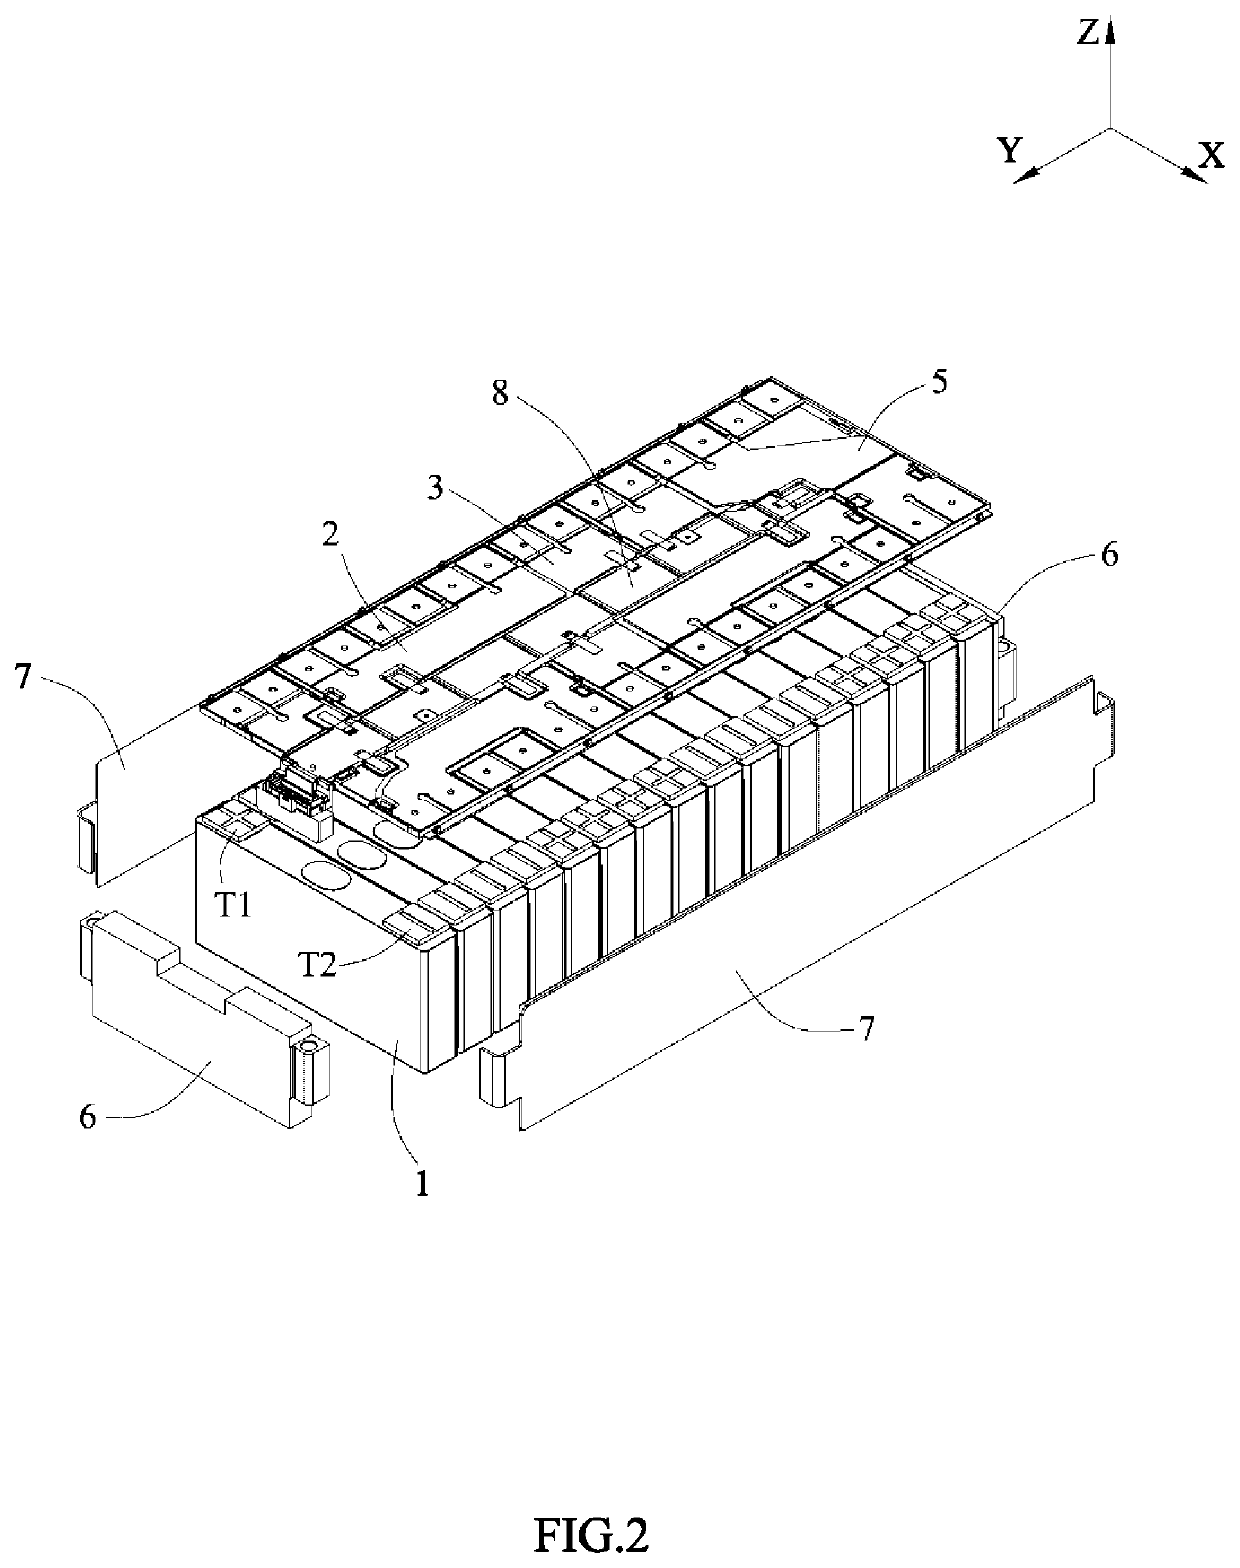 Battery module, busbar and busbar assembly thereof